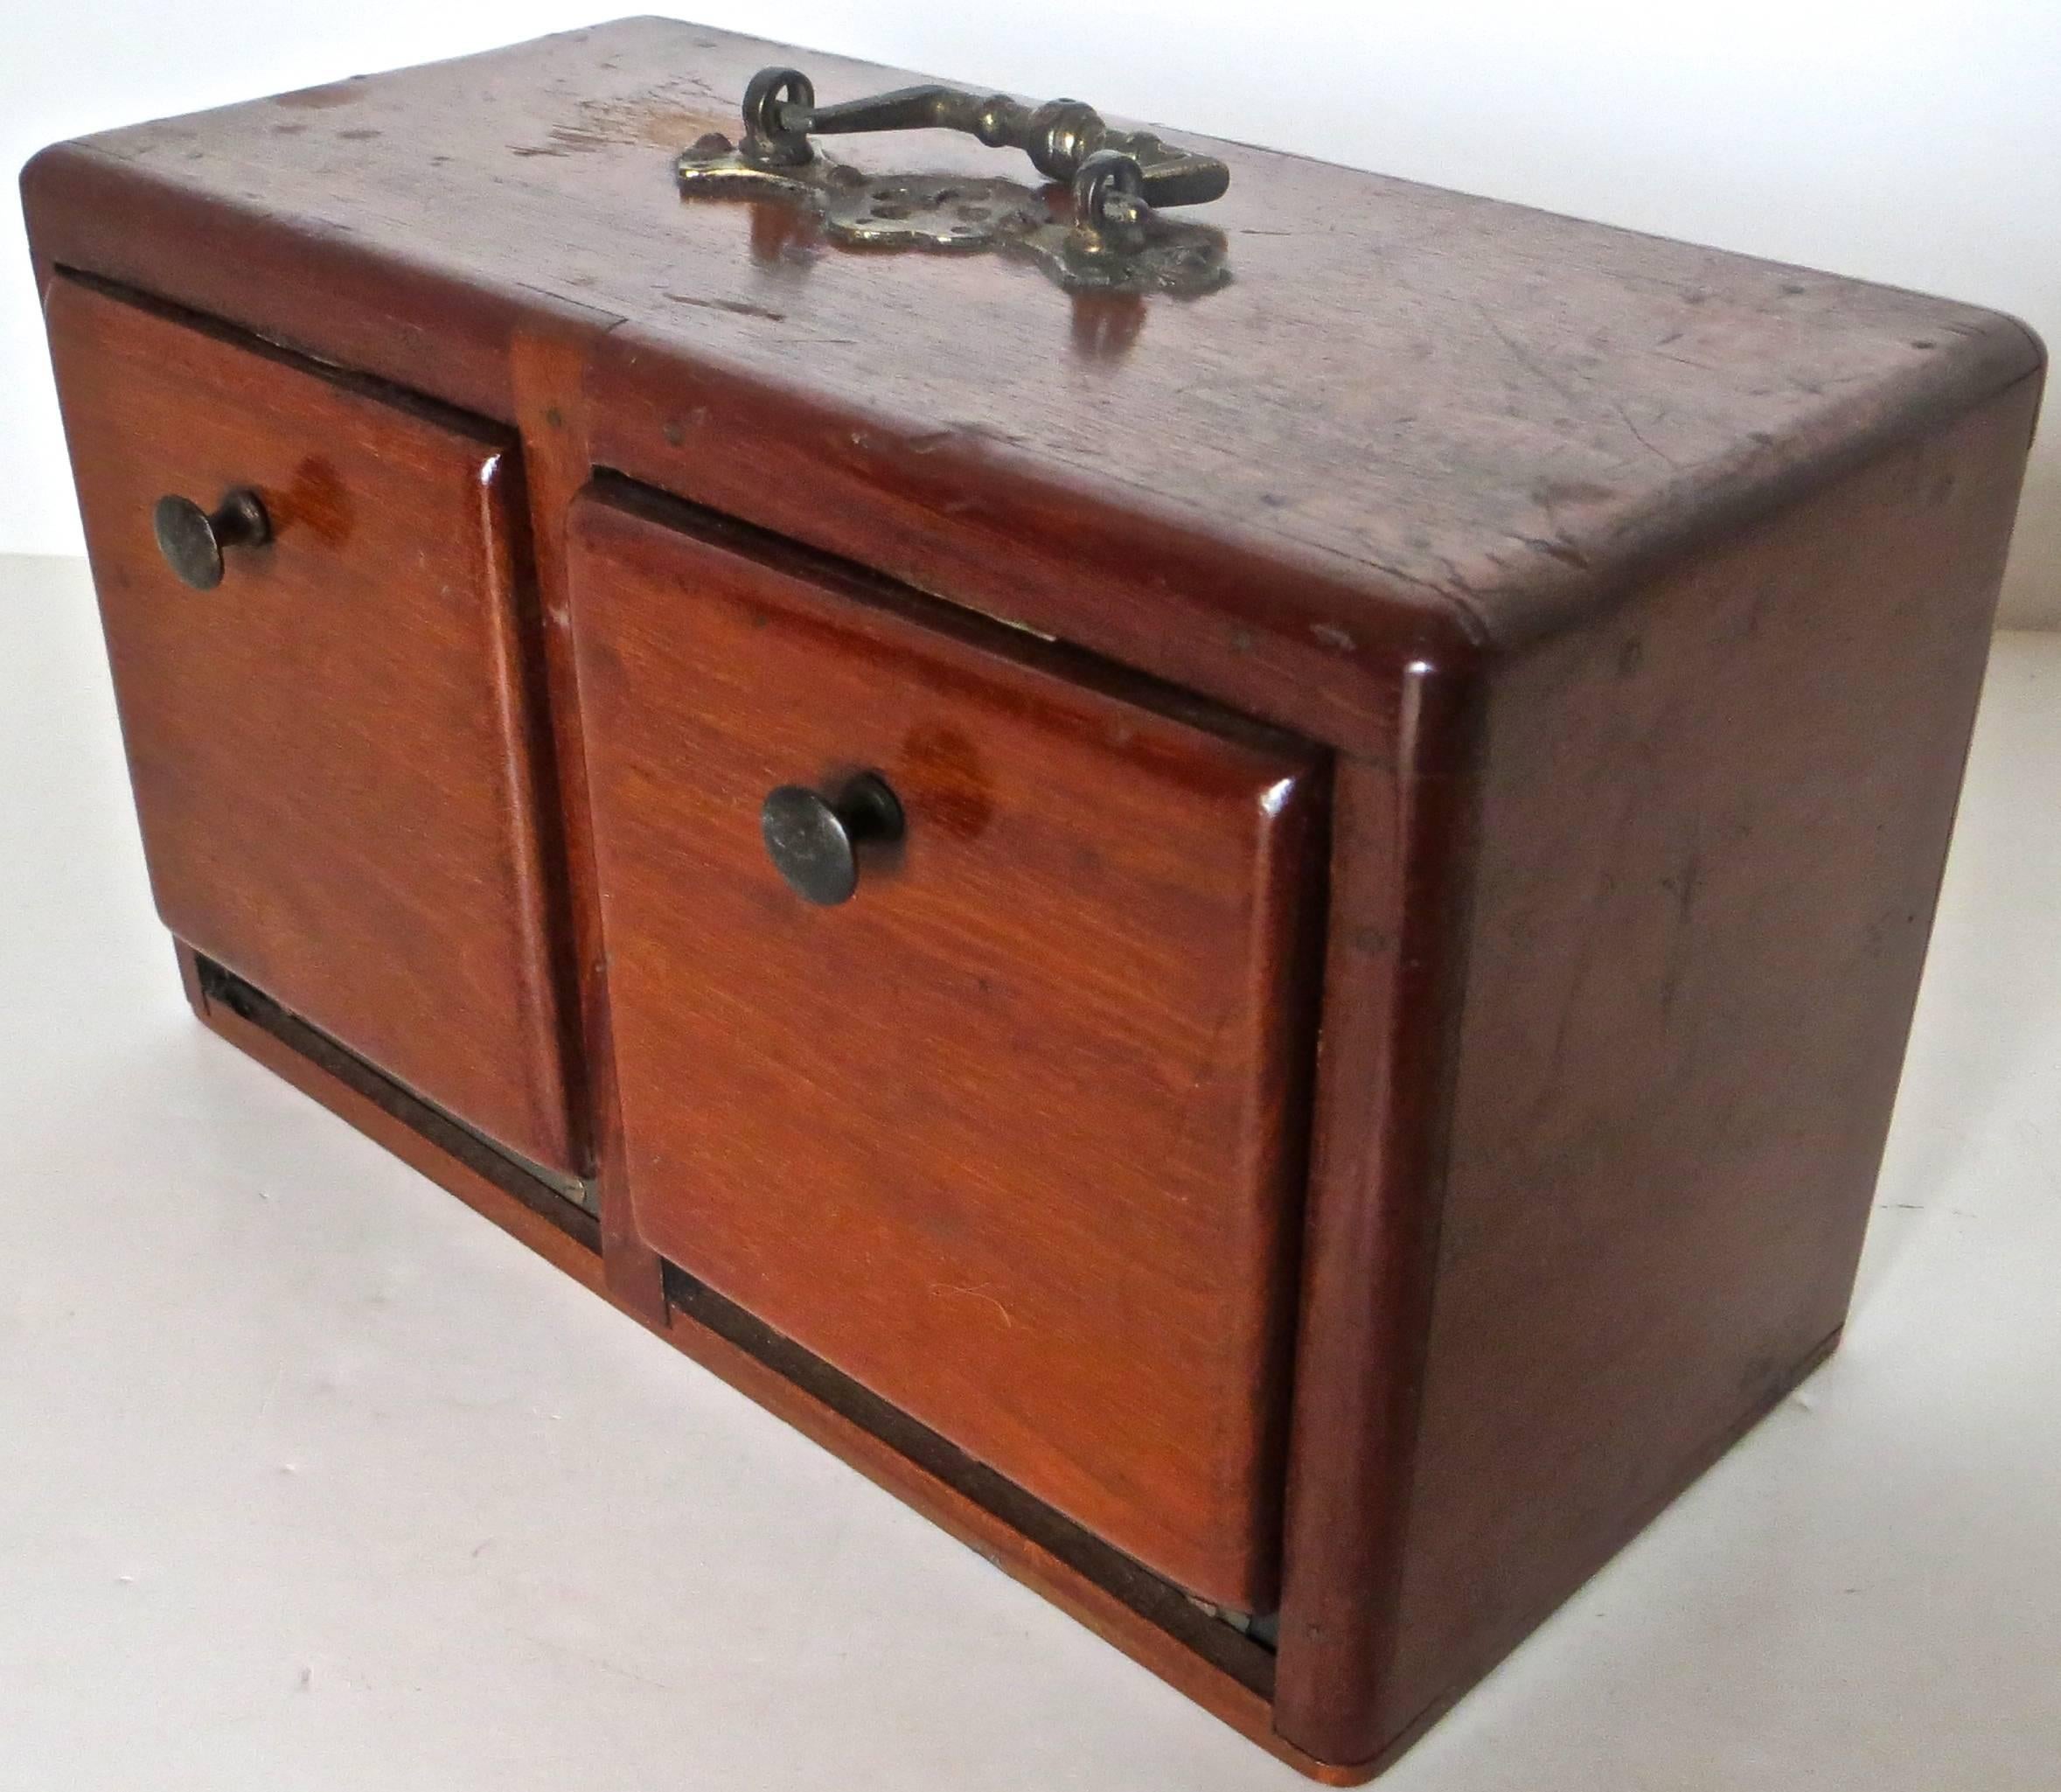 Hand-Crafted Two-Sided Four-Door Box with Pair of Dice, Magic Trick, circa 1890